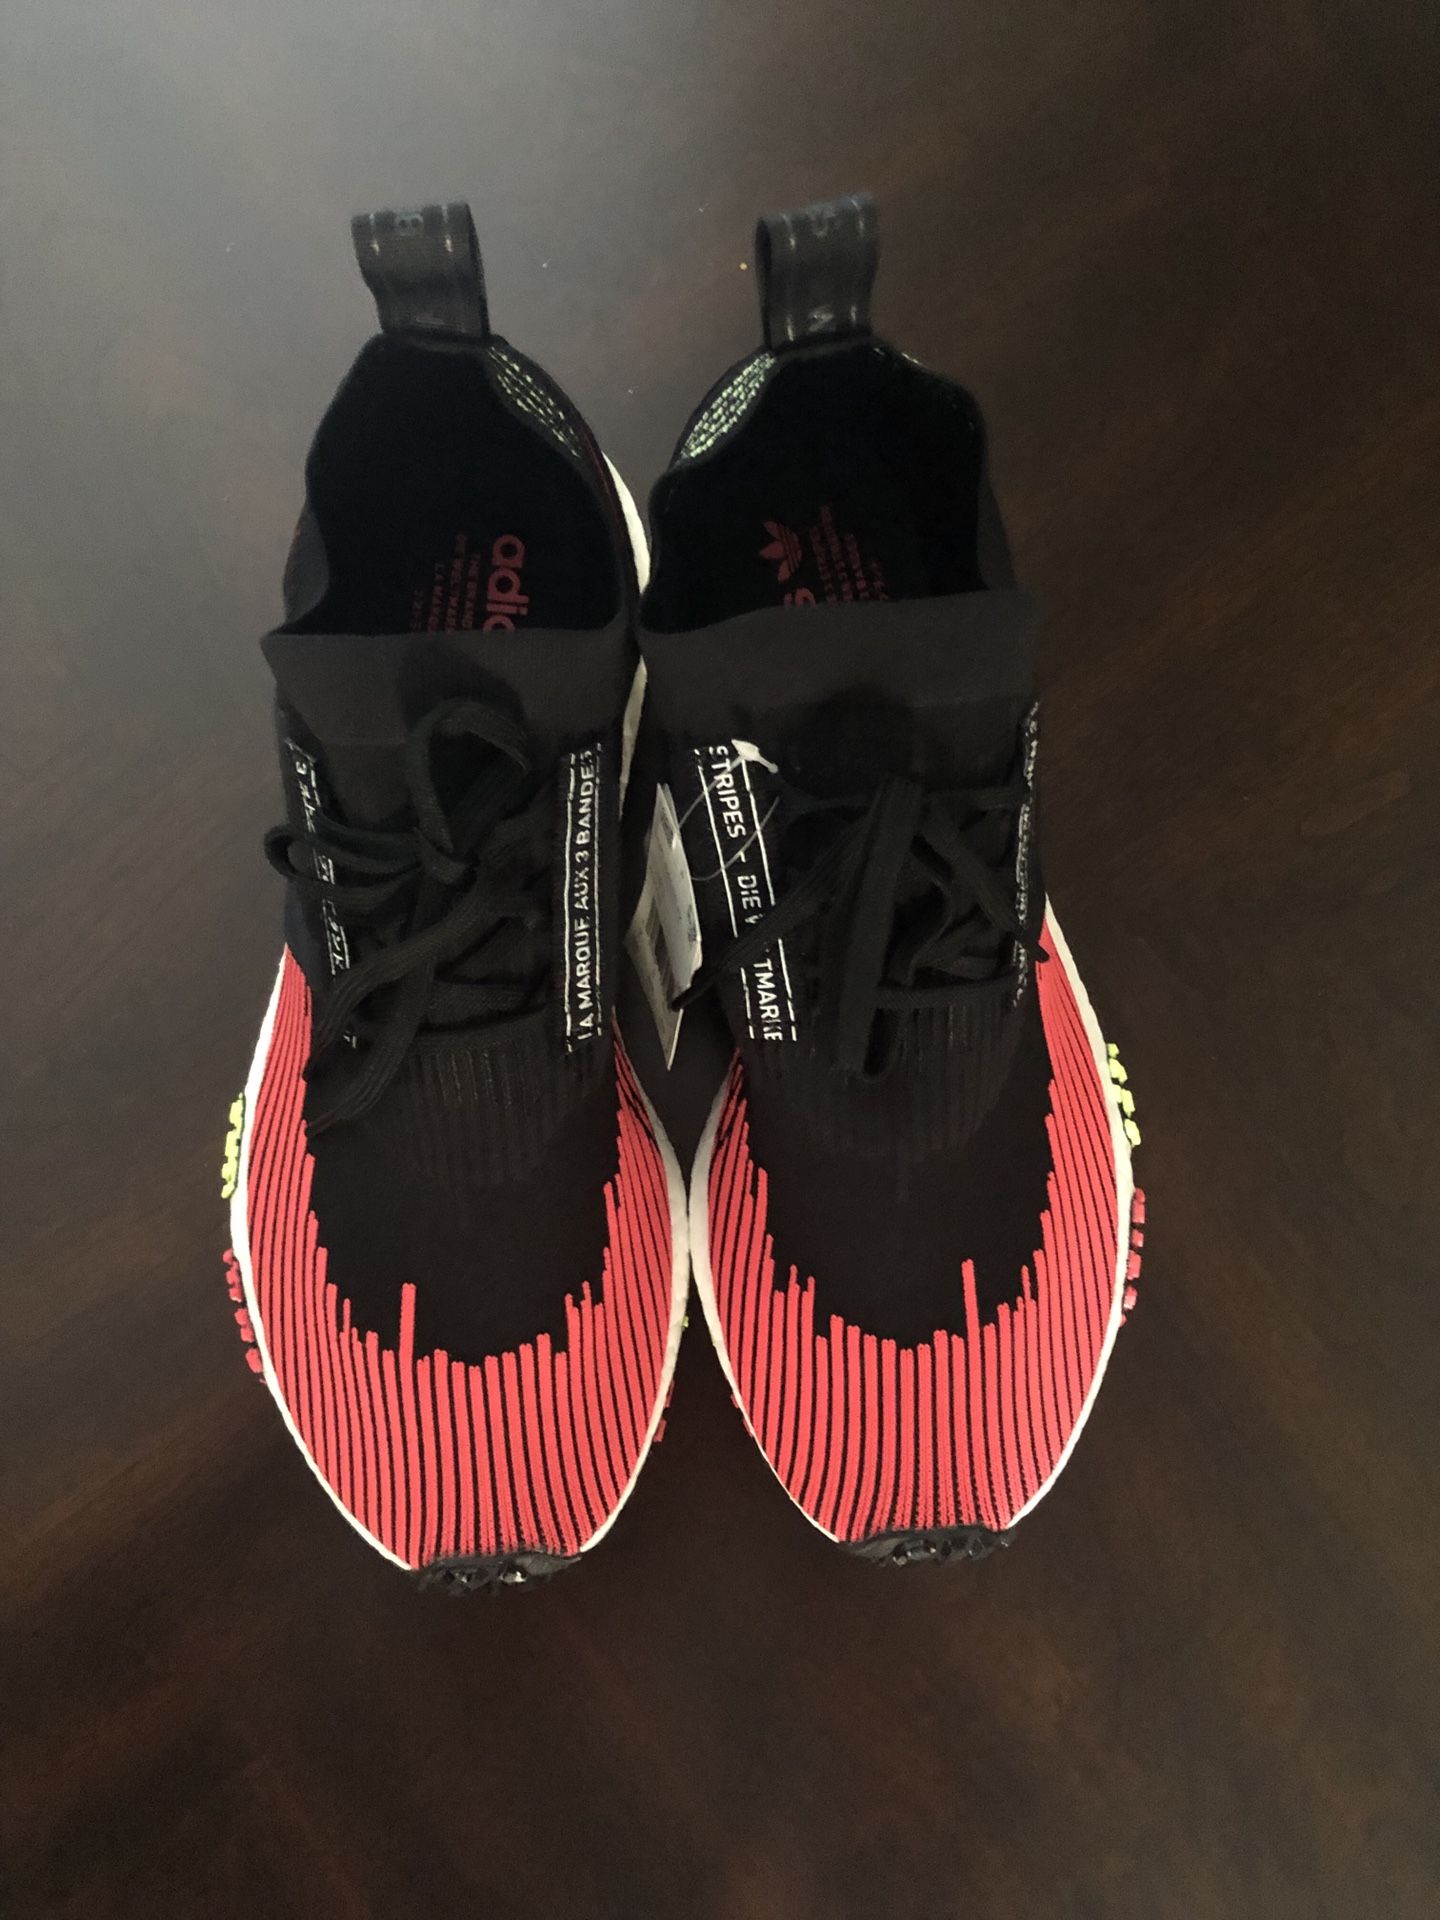 Adidas NMD Racer “Solar Red” Size 9.5 Men’s